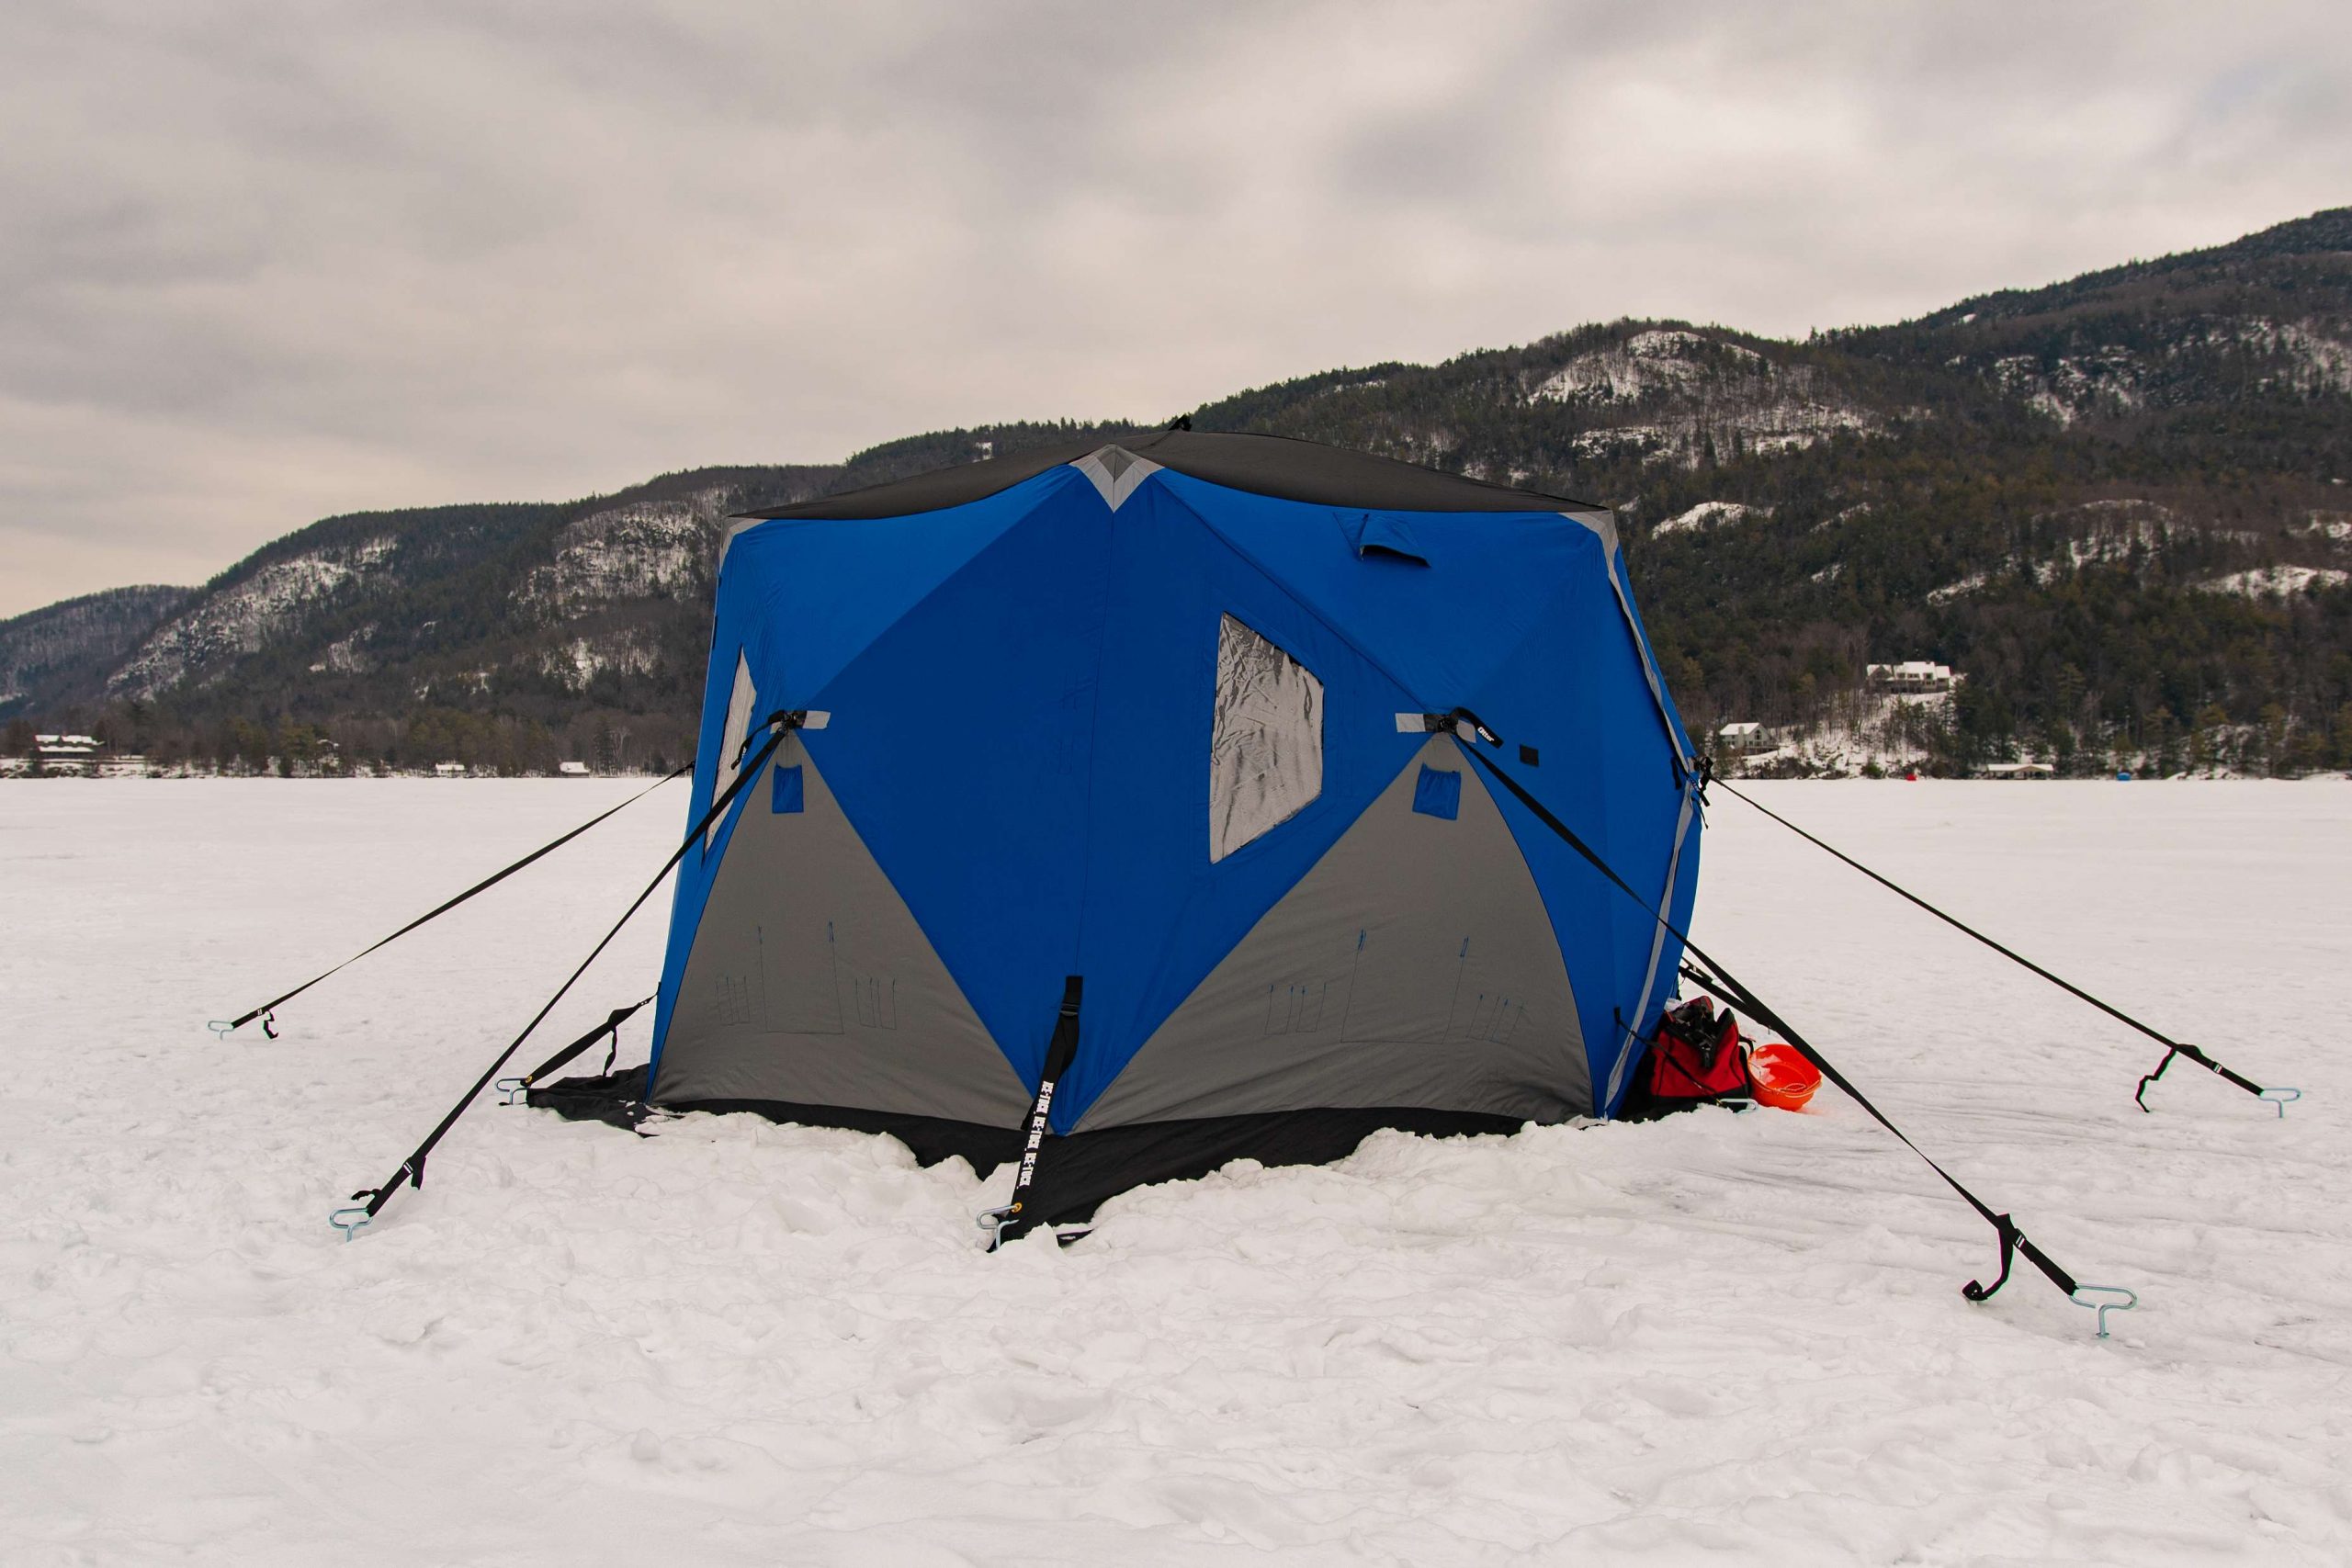 The Otter Resort is large enough for several people but is perfect for storing gear out of the cold wind.